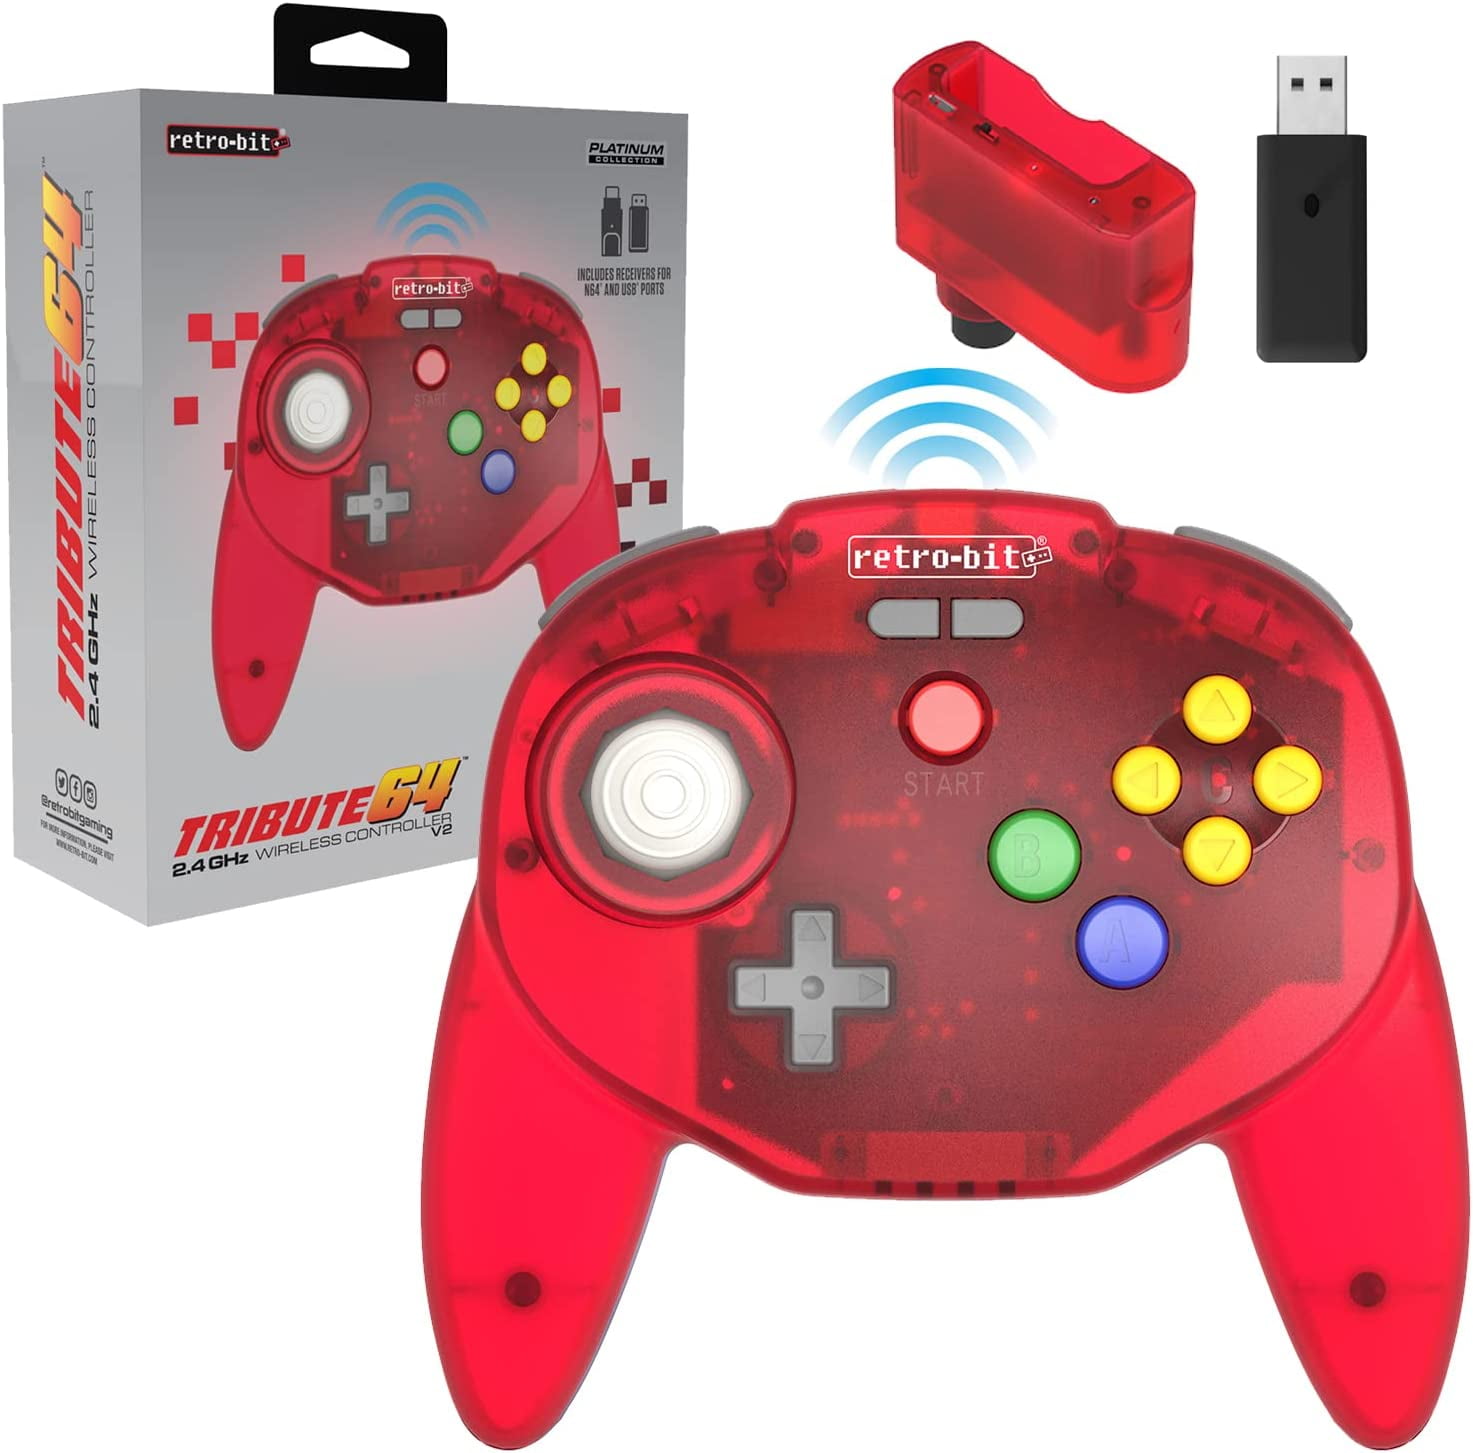 Retro-Bit Tribute64 2.4GHz Wireless Controller for Nintendo 64 (N64), Switch, PC, MacOS, RetroPie, Raspberry Pi and Other Devices (Clear Red)